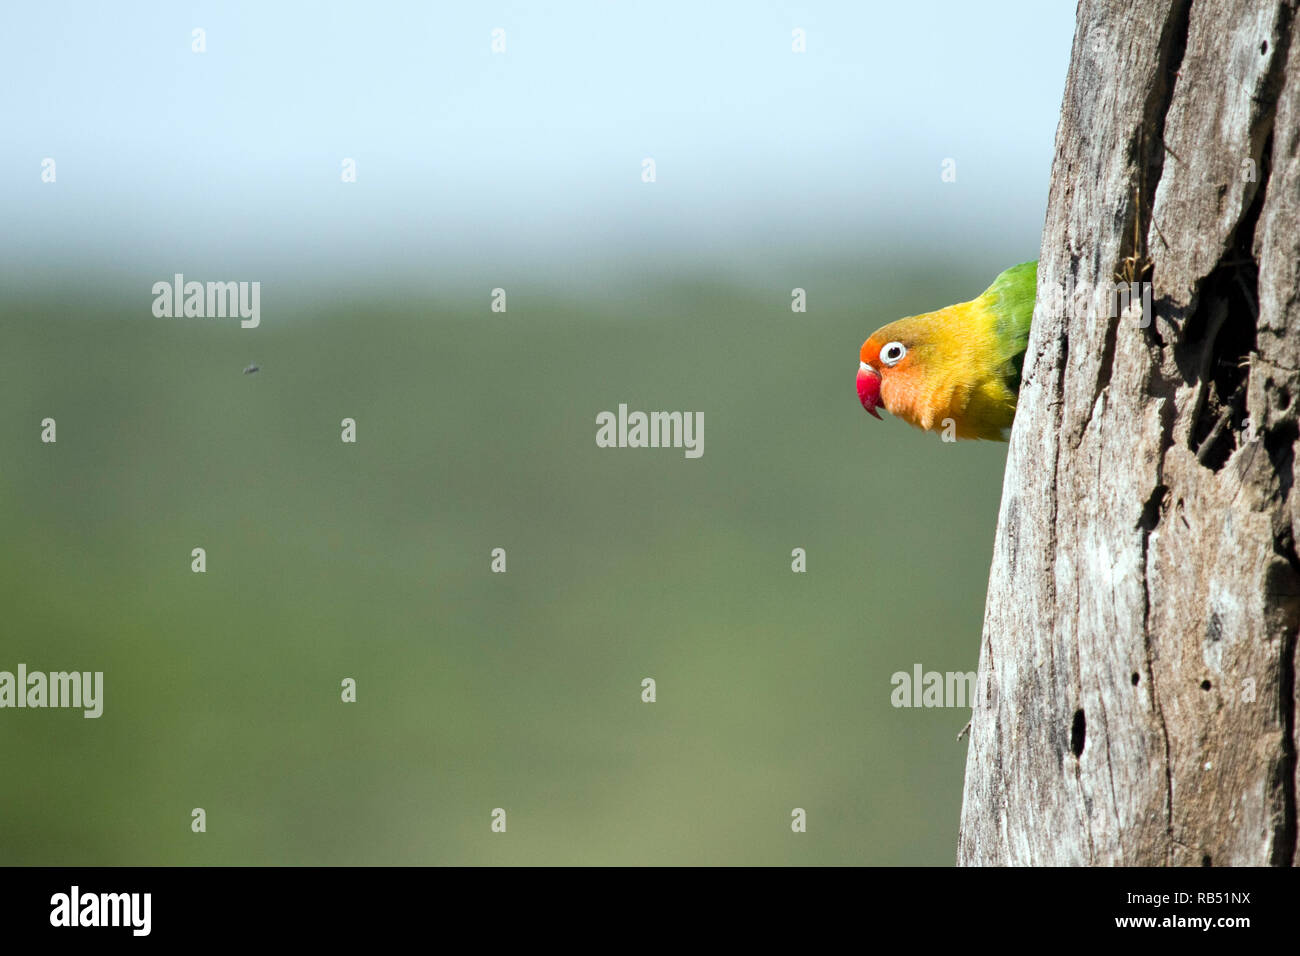 the colorful love bird going out of his nest. Stock Photo